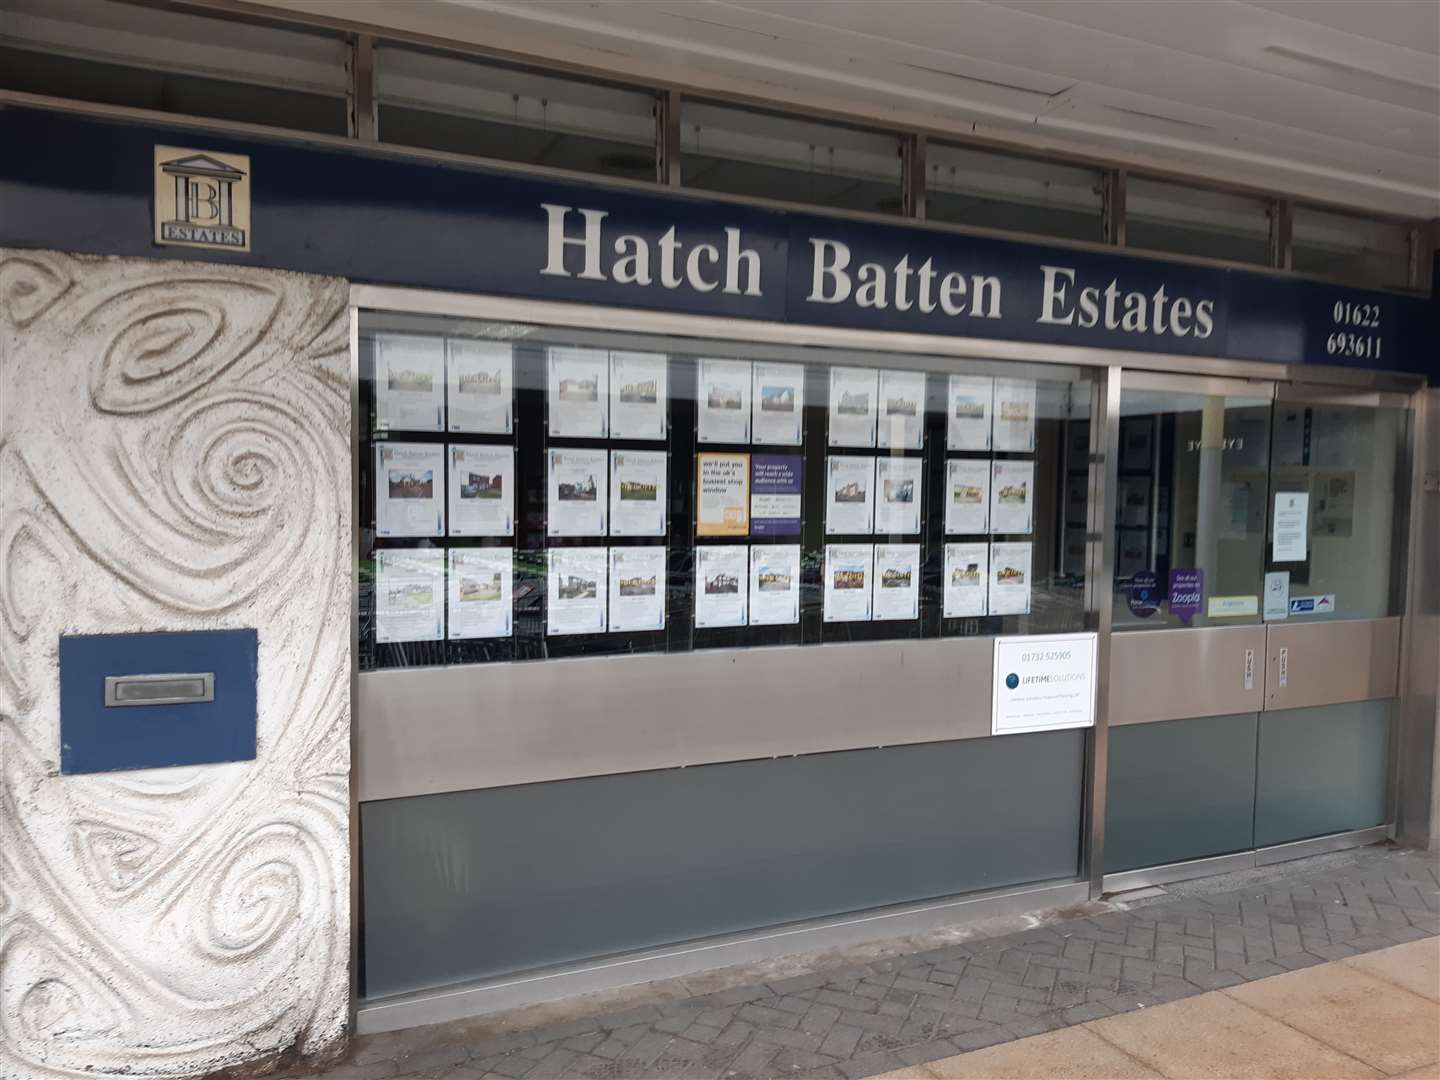 The Hatch Batten offices within the Mid Kent Shopping centre in Allington